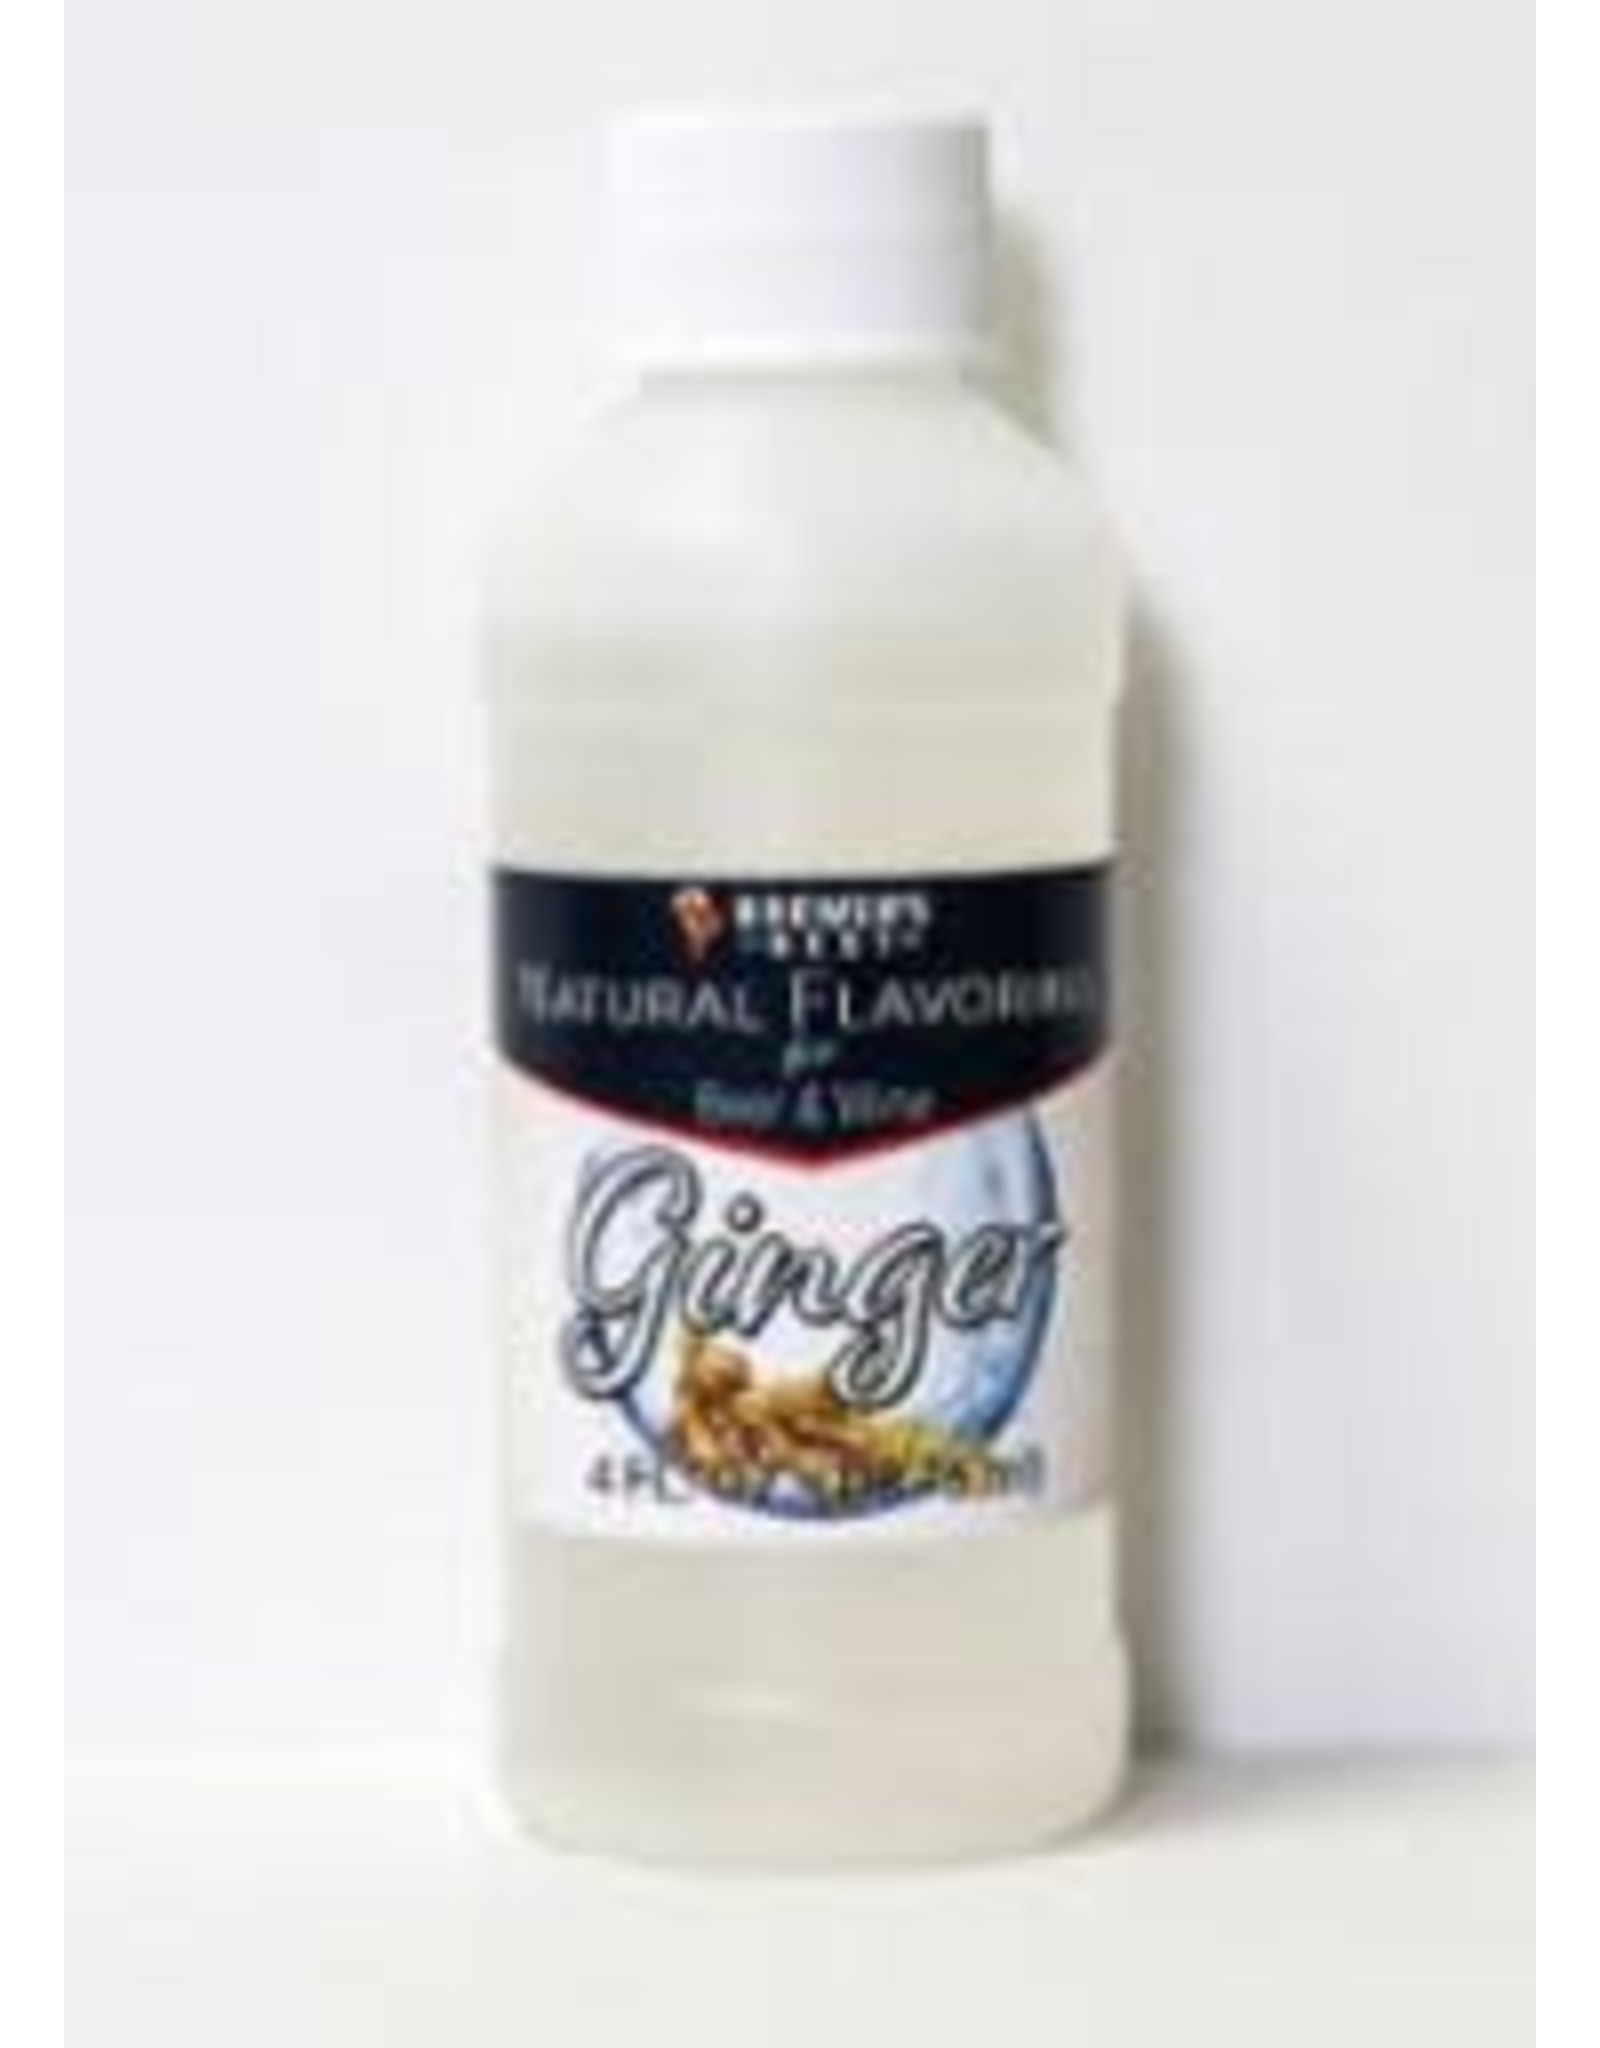 Brewer's Best All natural extract 4 oz Ginger